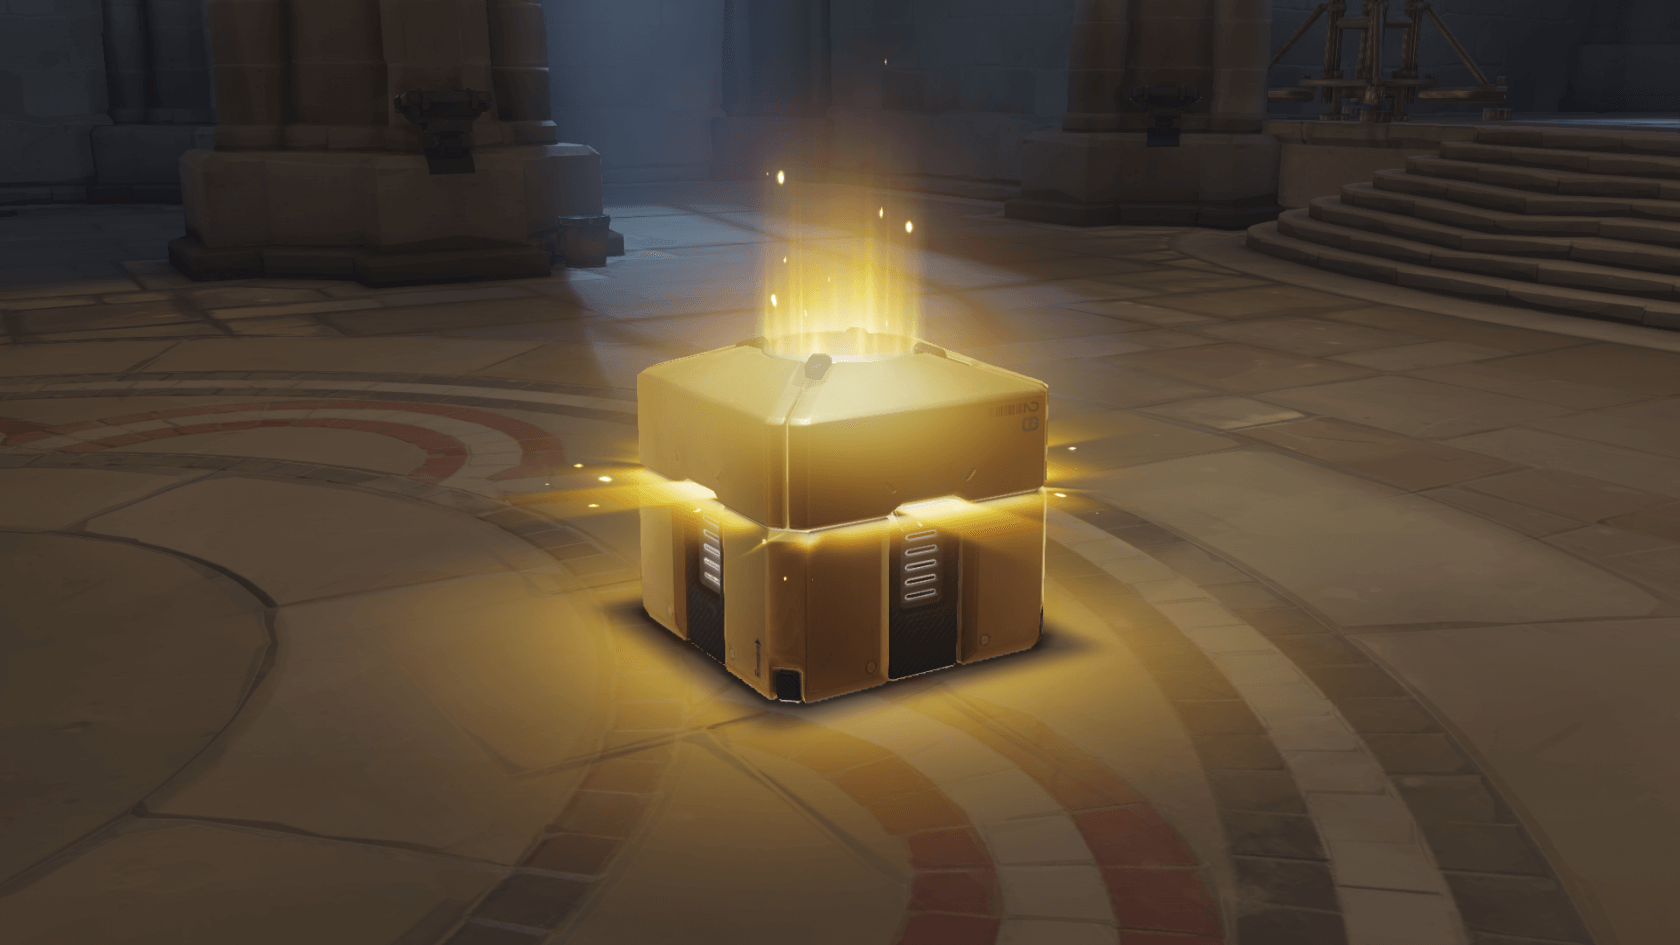 EA believes 'surprise mechanics' and loot boxes are 'quite ethical and quite fun'